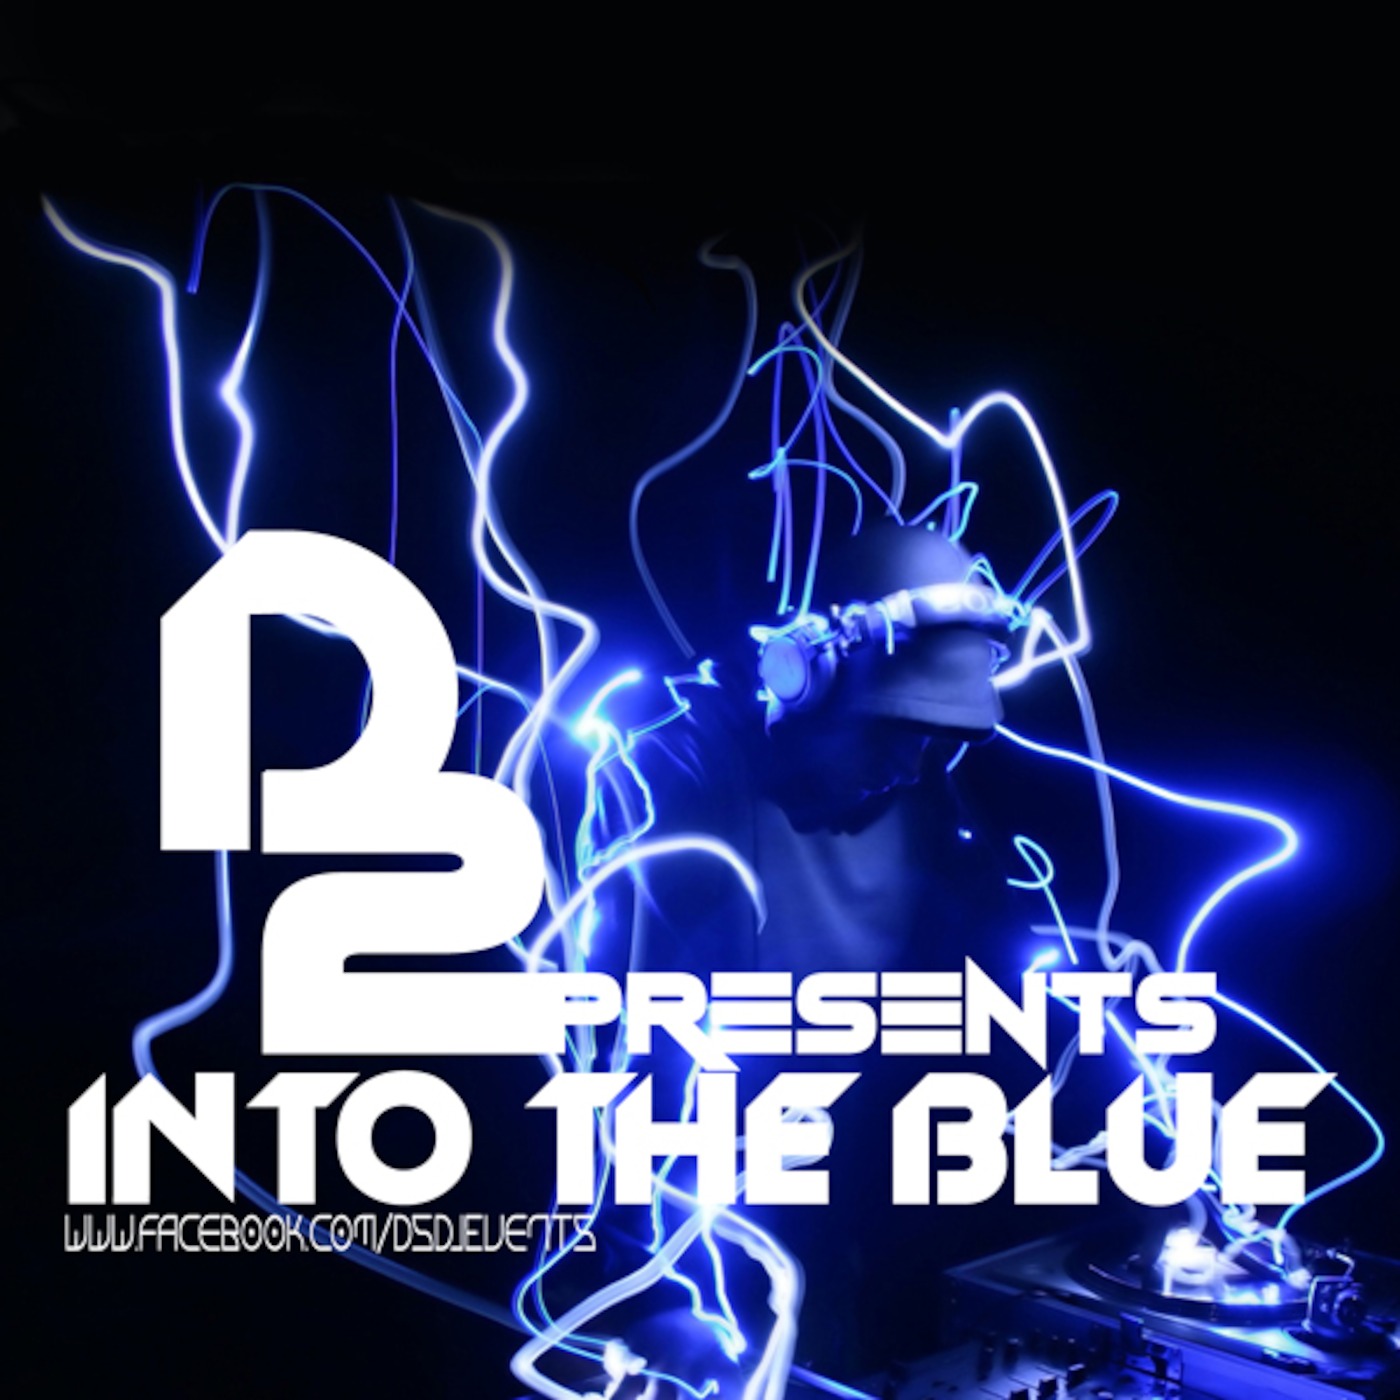 D2 Presents into the blue